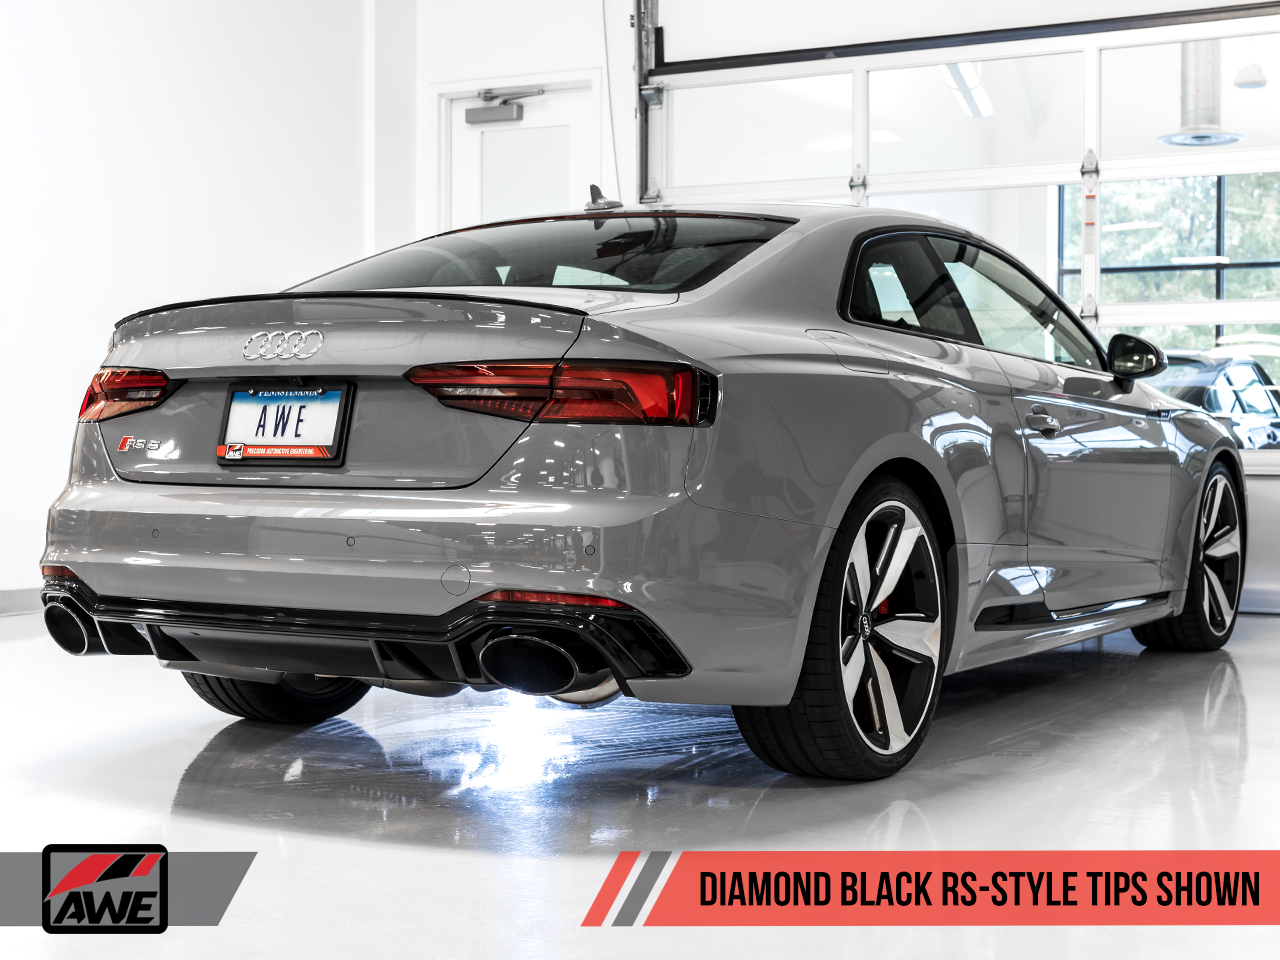 AWE Tuning Touring Edition Exhaust for Audi B9 RS 5 - Resonated for Performance Catalysts - Diamond Black RS-style Tips